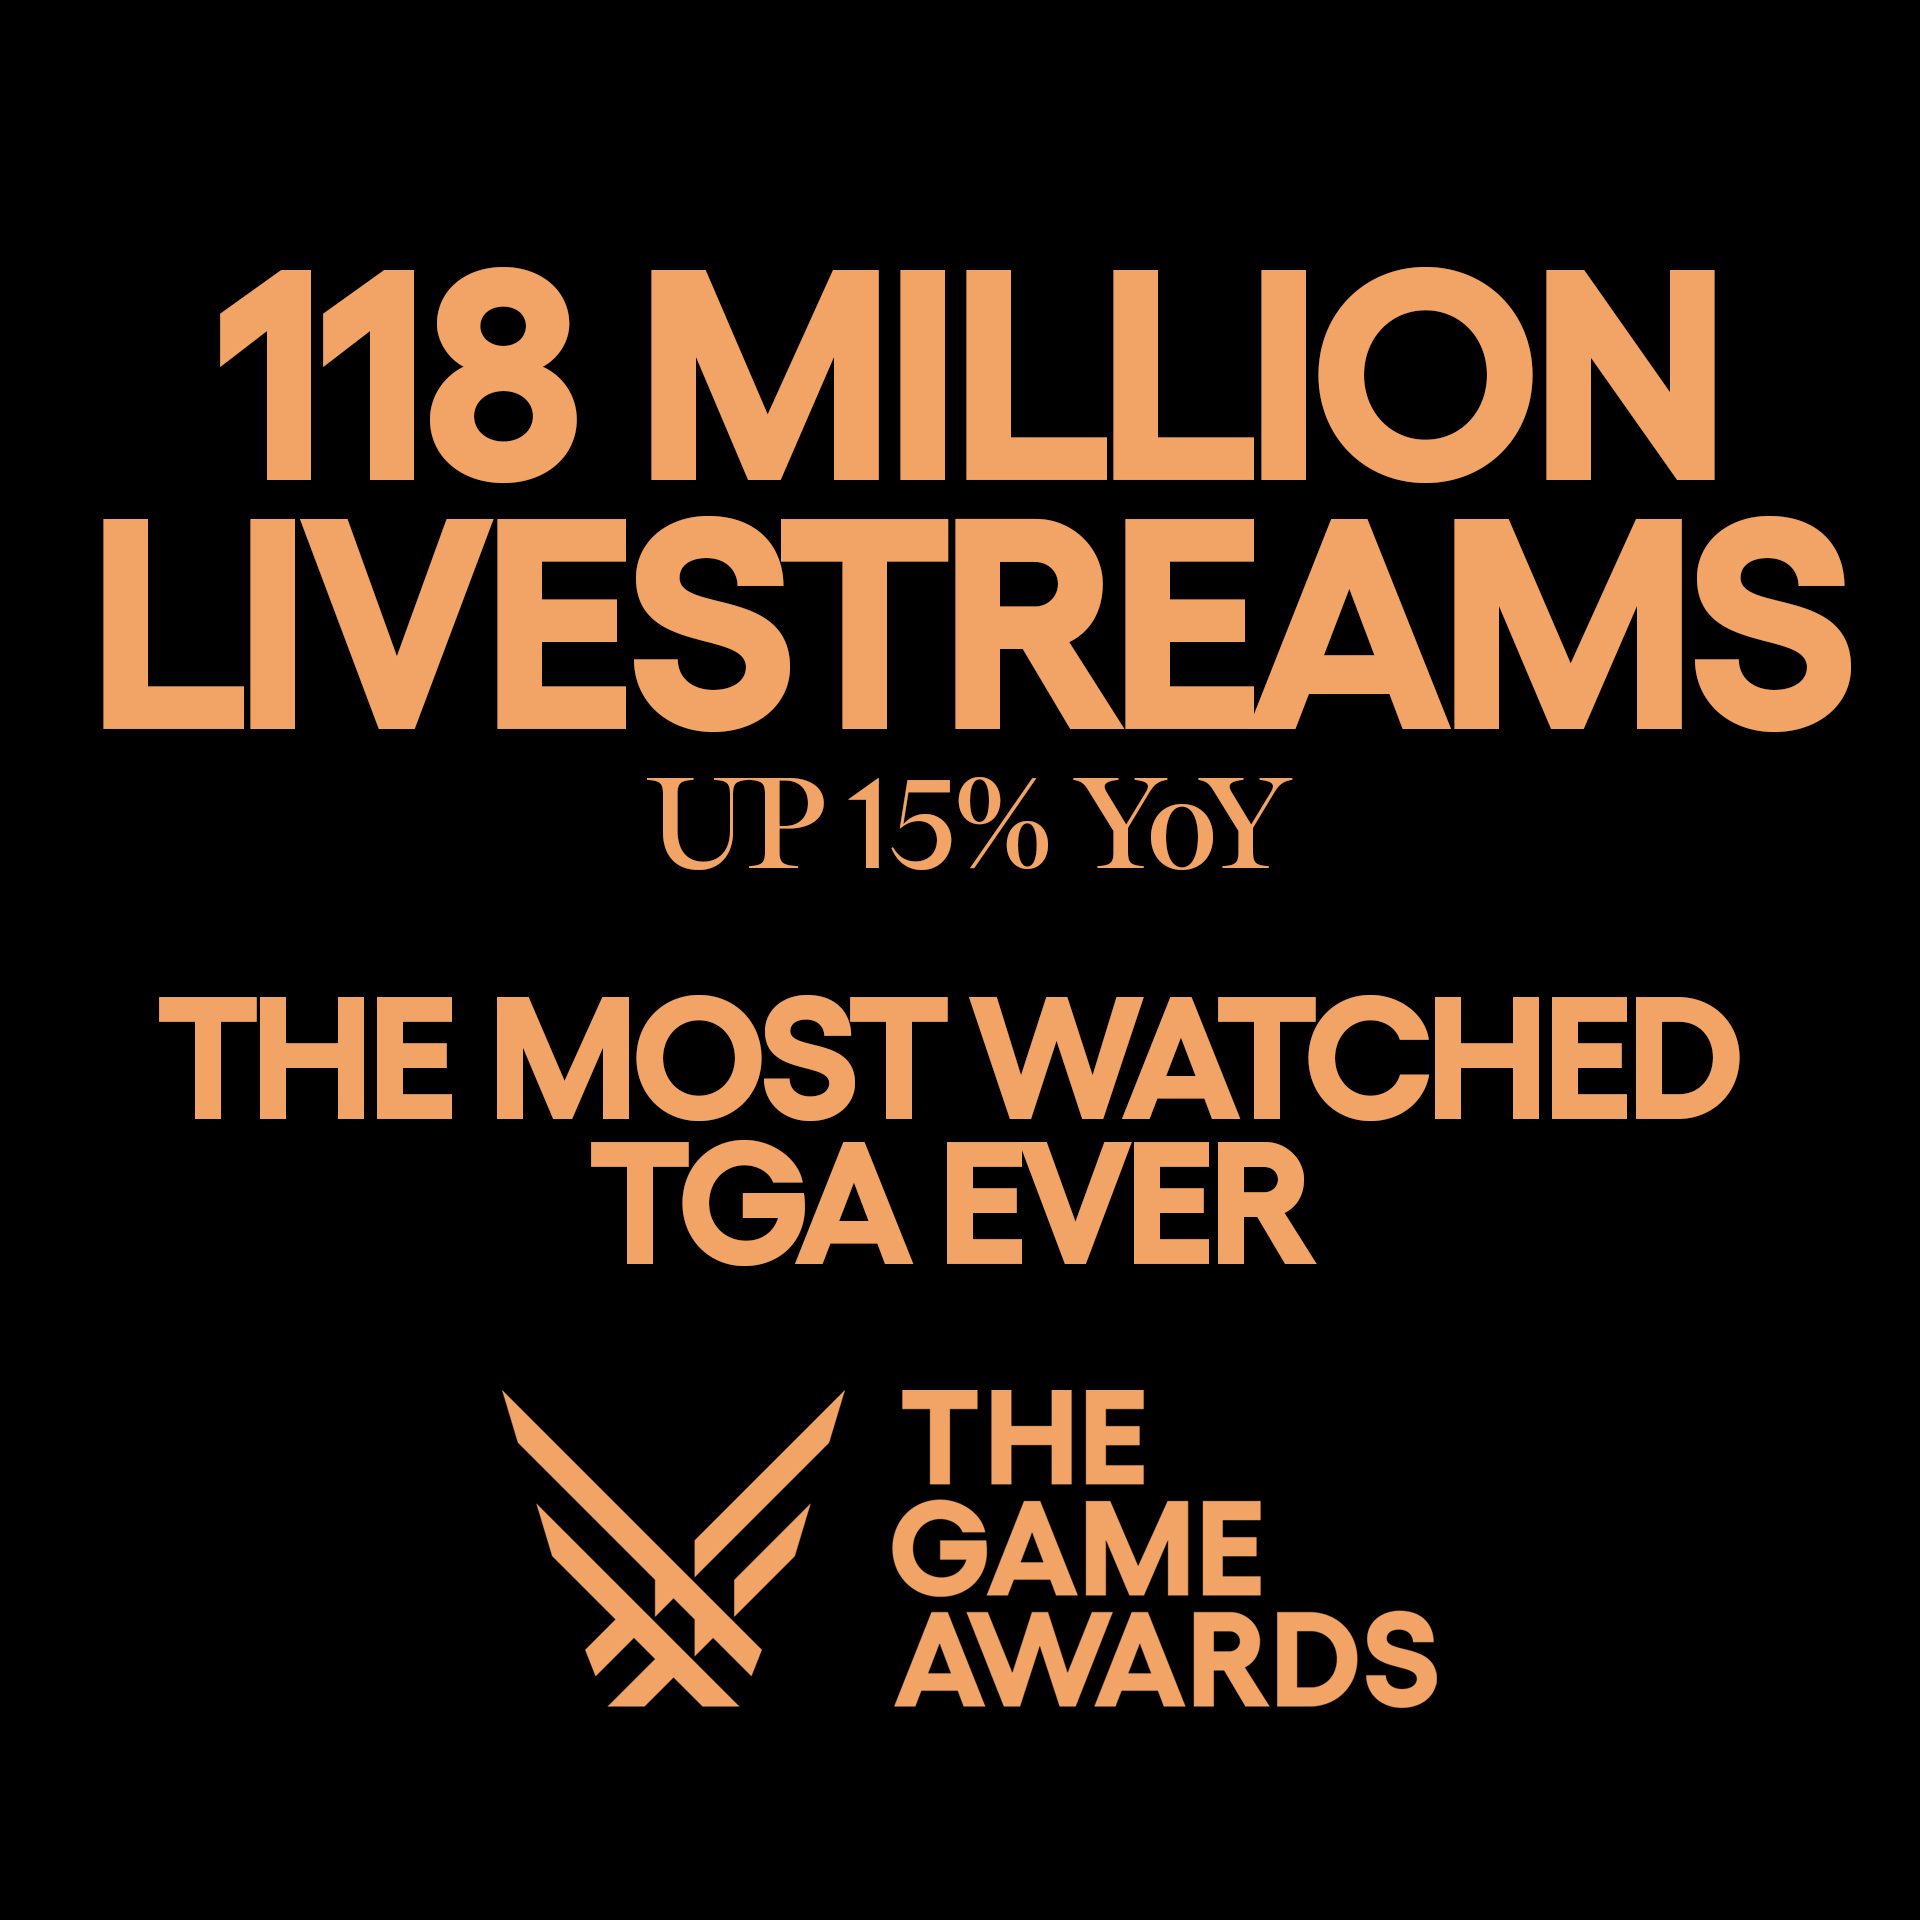 The Game Awards 2023: Increase in Viewership and Gaming Interest